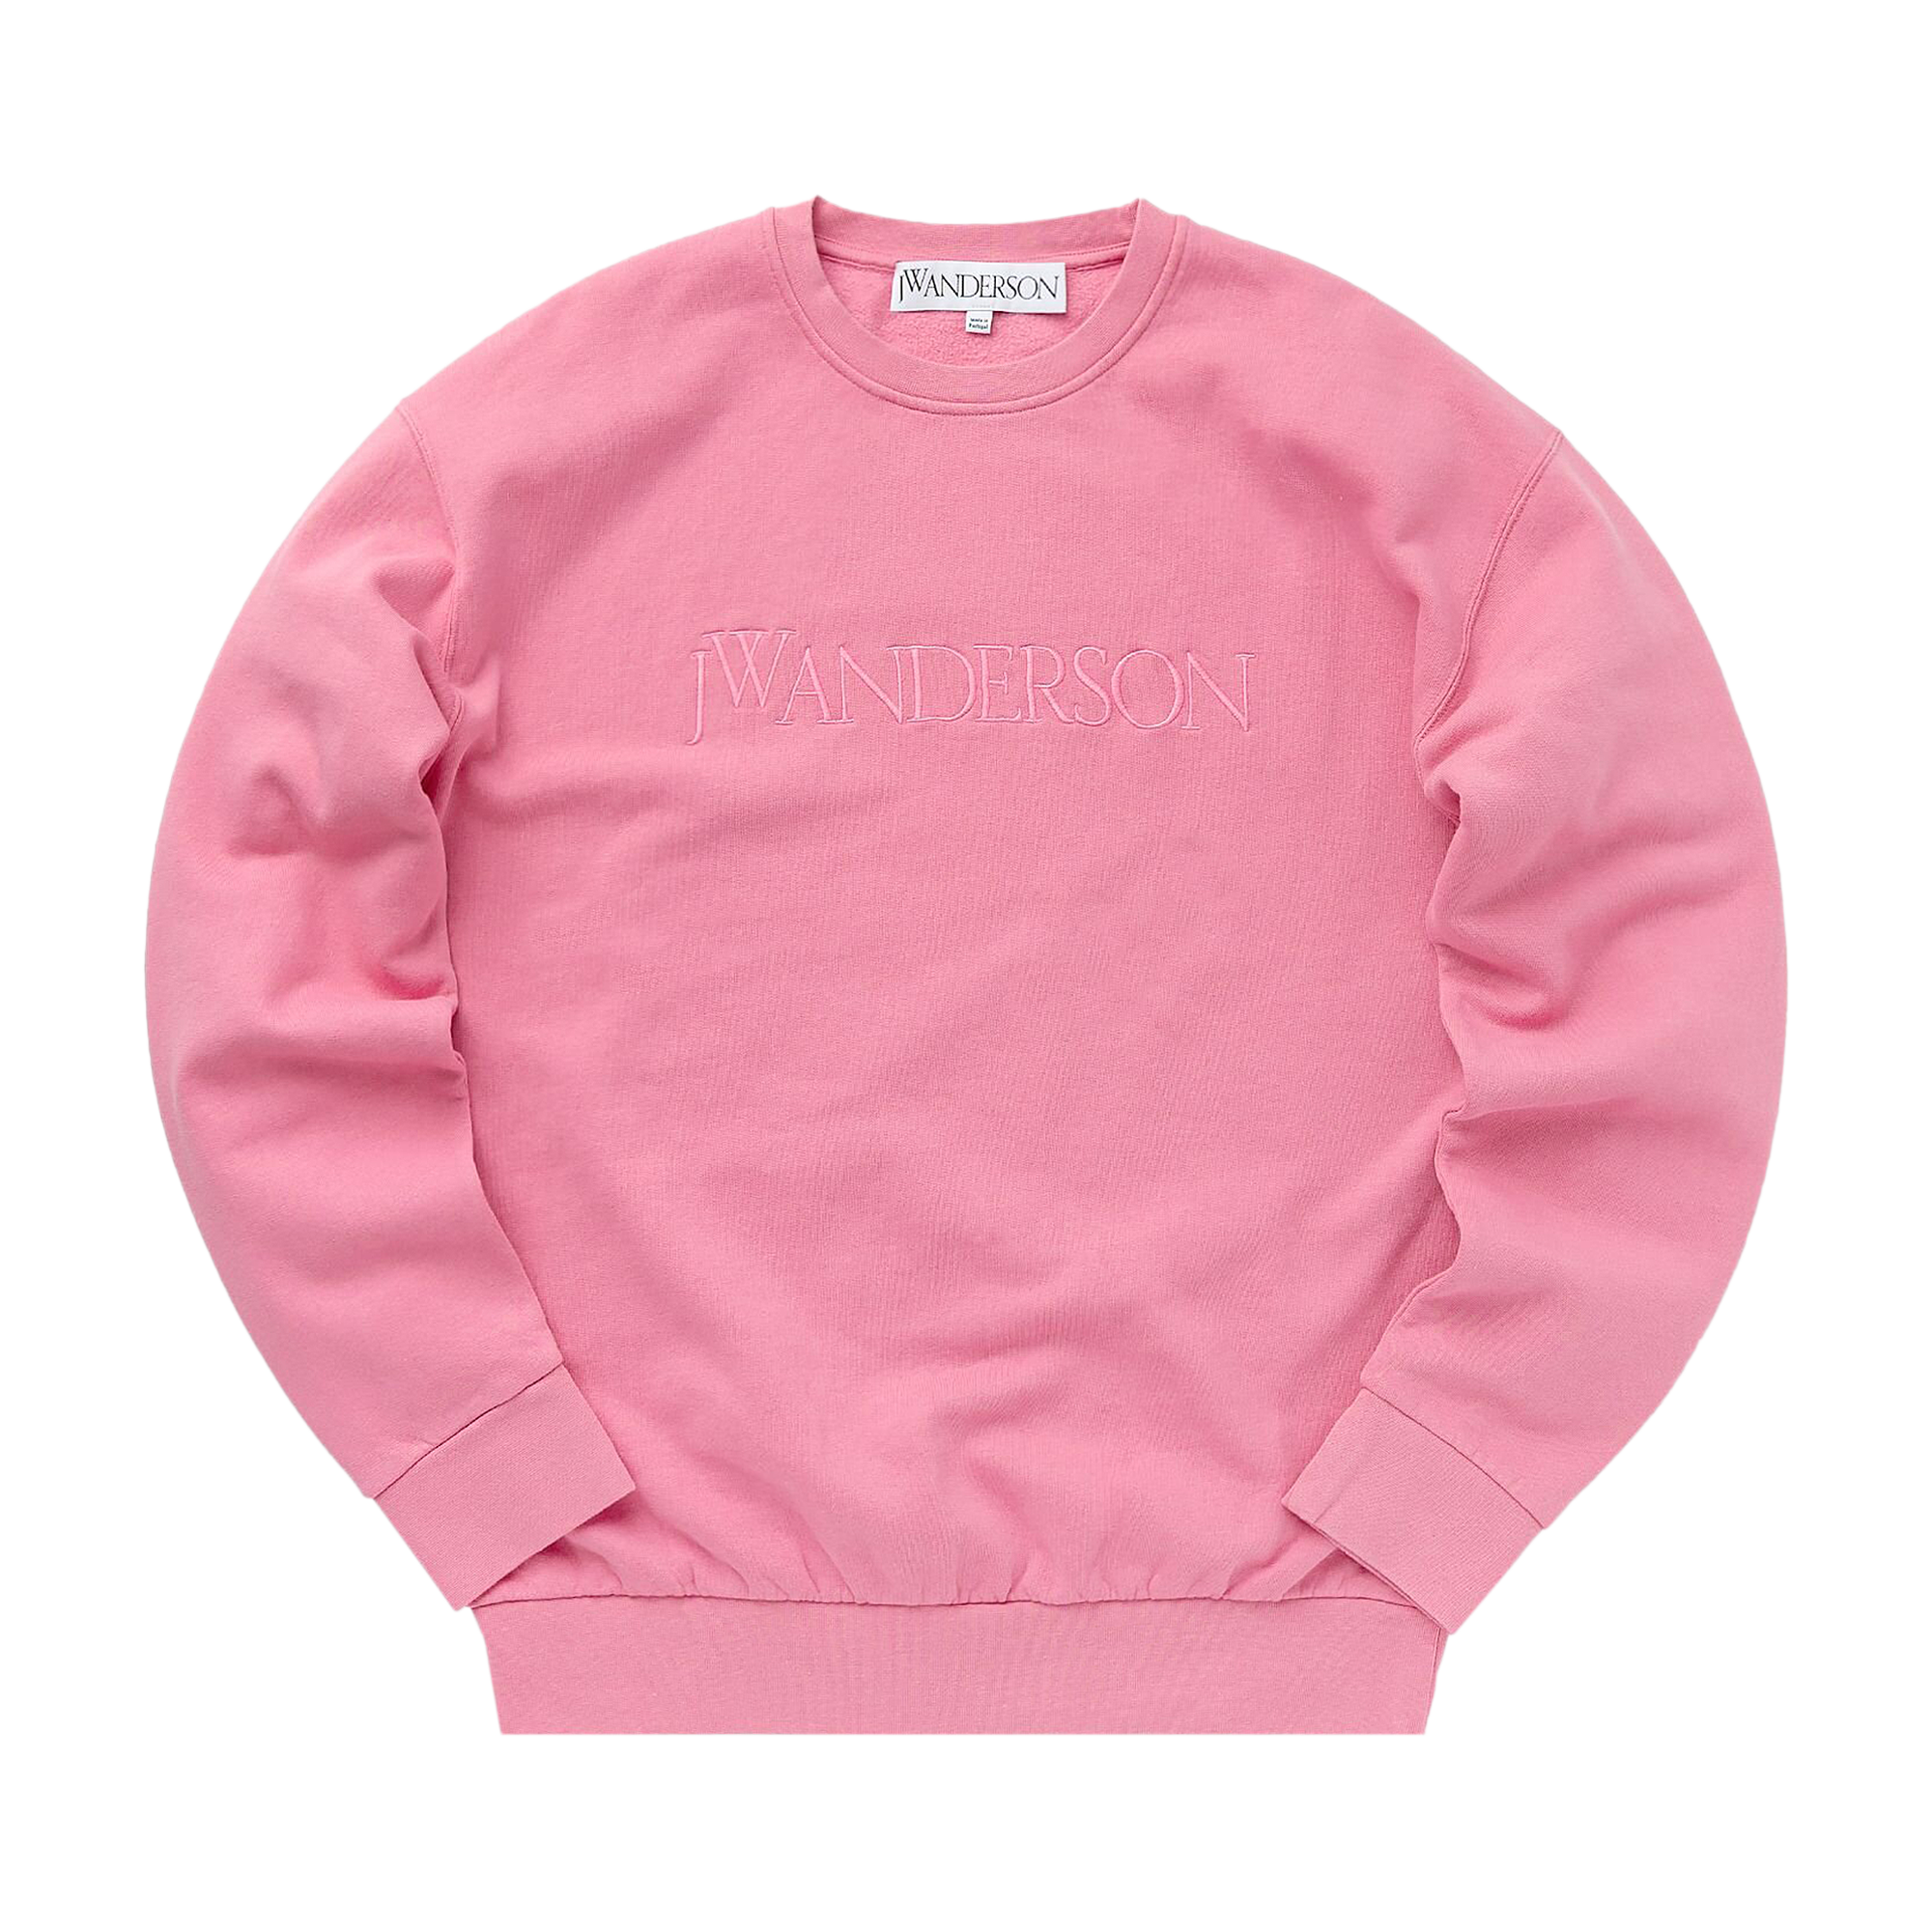 Pre-owned Jw Anderson Logo Embroidered Sweatshirt 'pink'